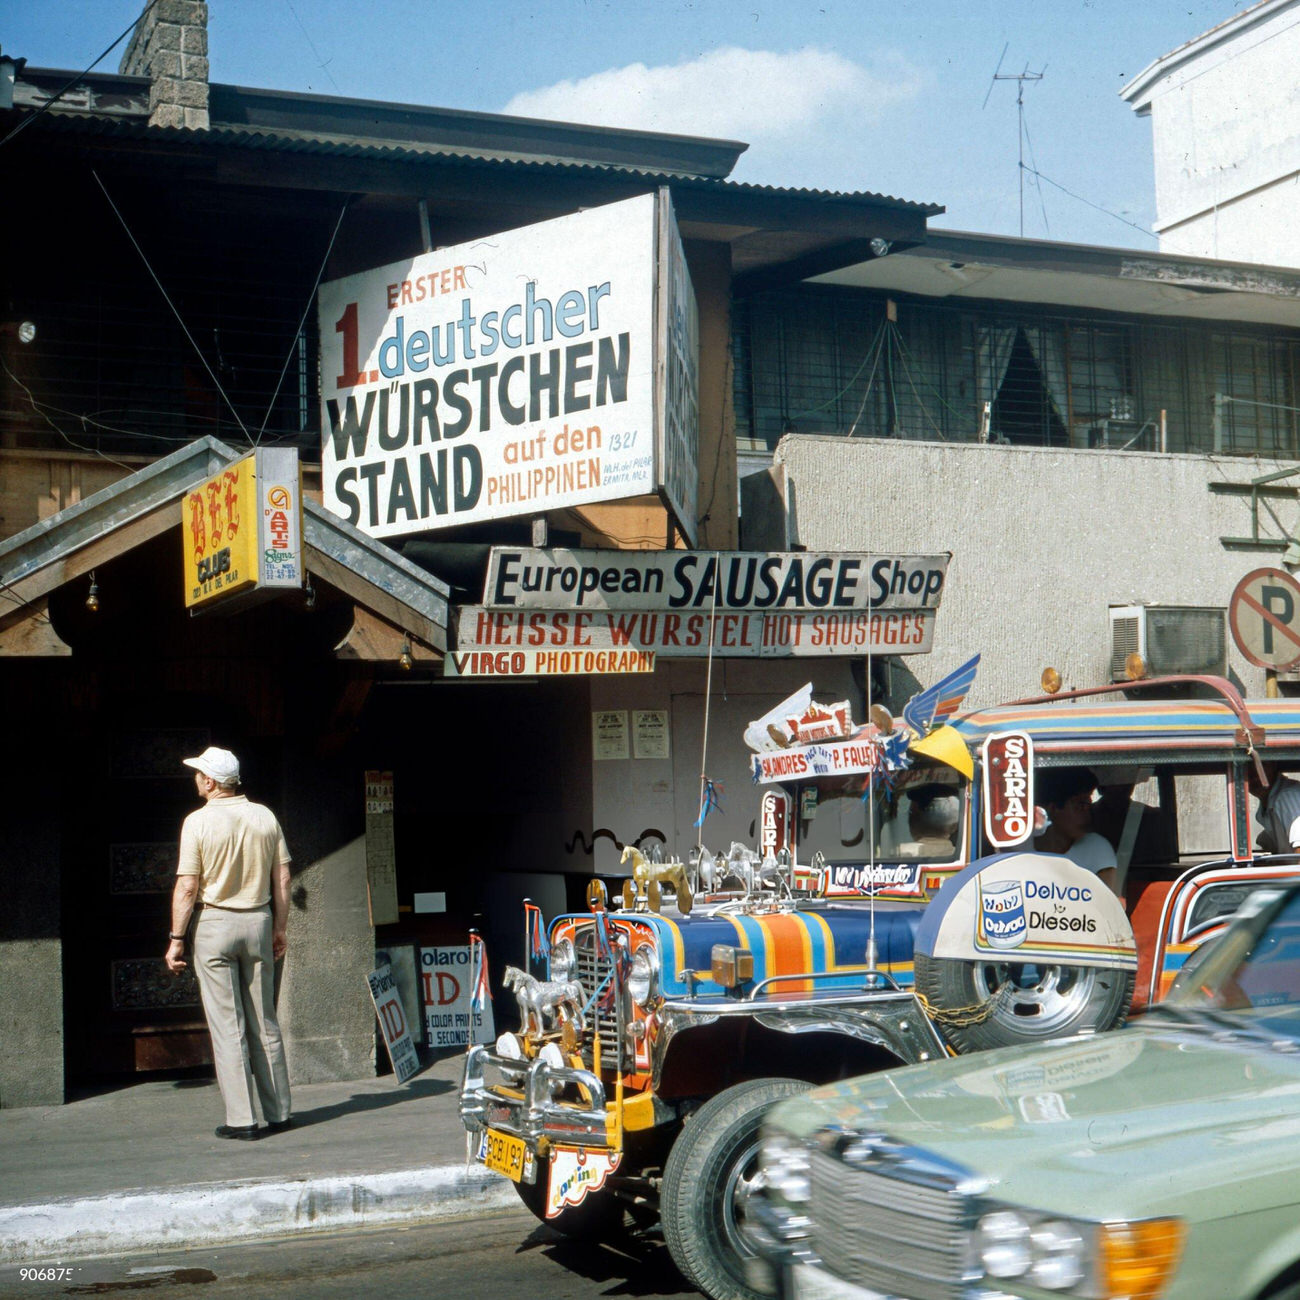 The first German sausage shop in Manila, Philippines, opens in the early 1980s.